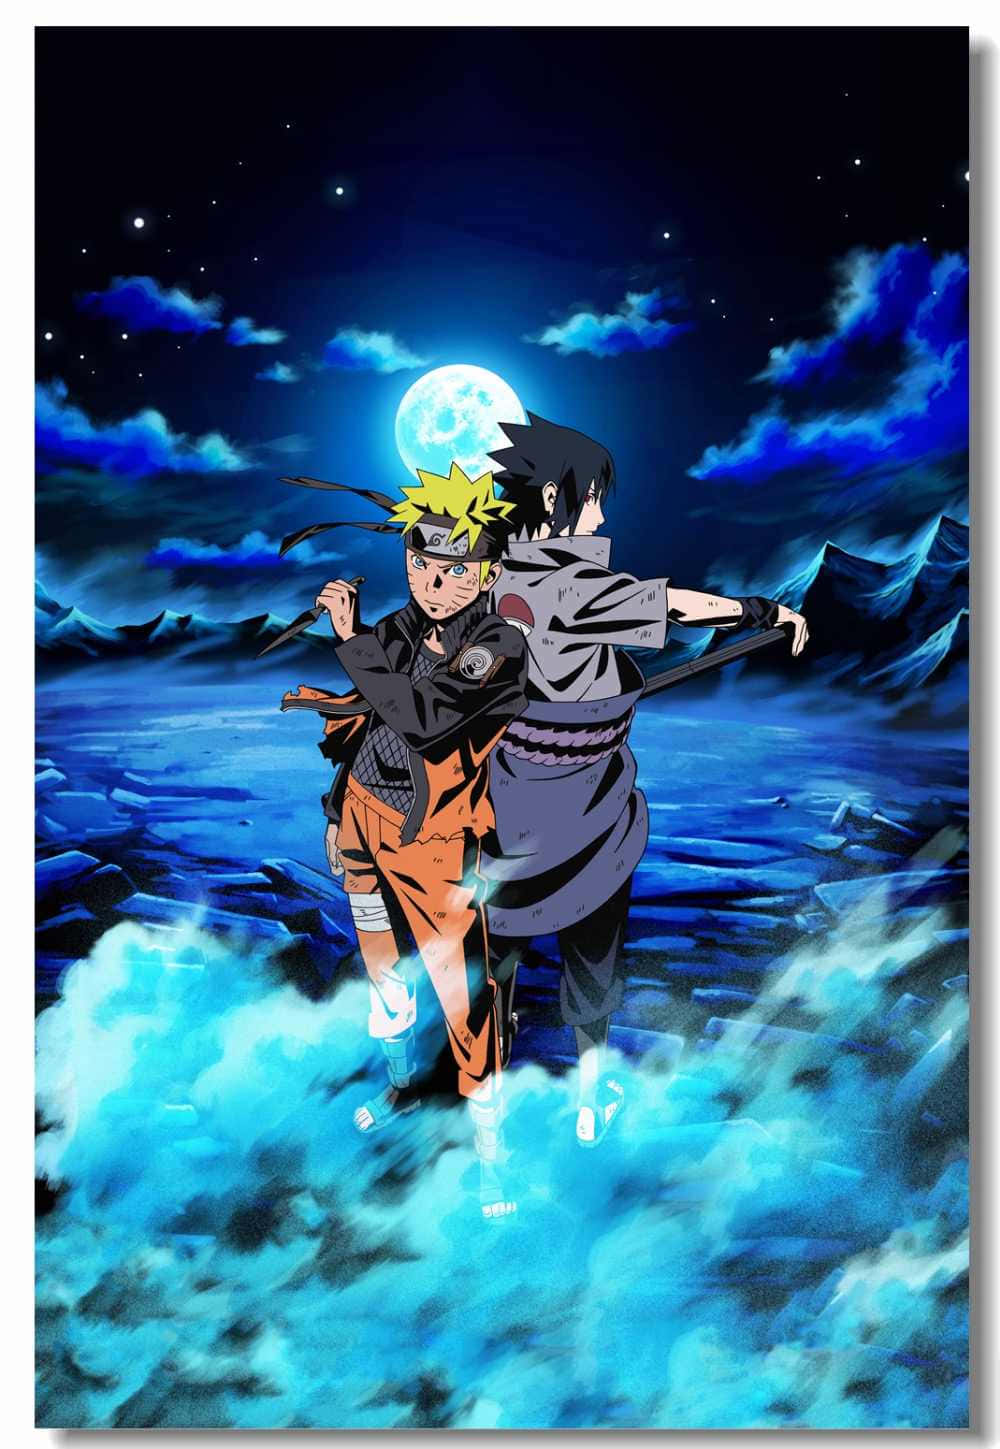 Caption: Embrace the Way of the Ninja with this Stunning Naruto Phone Background